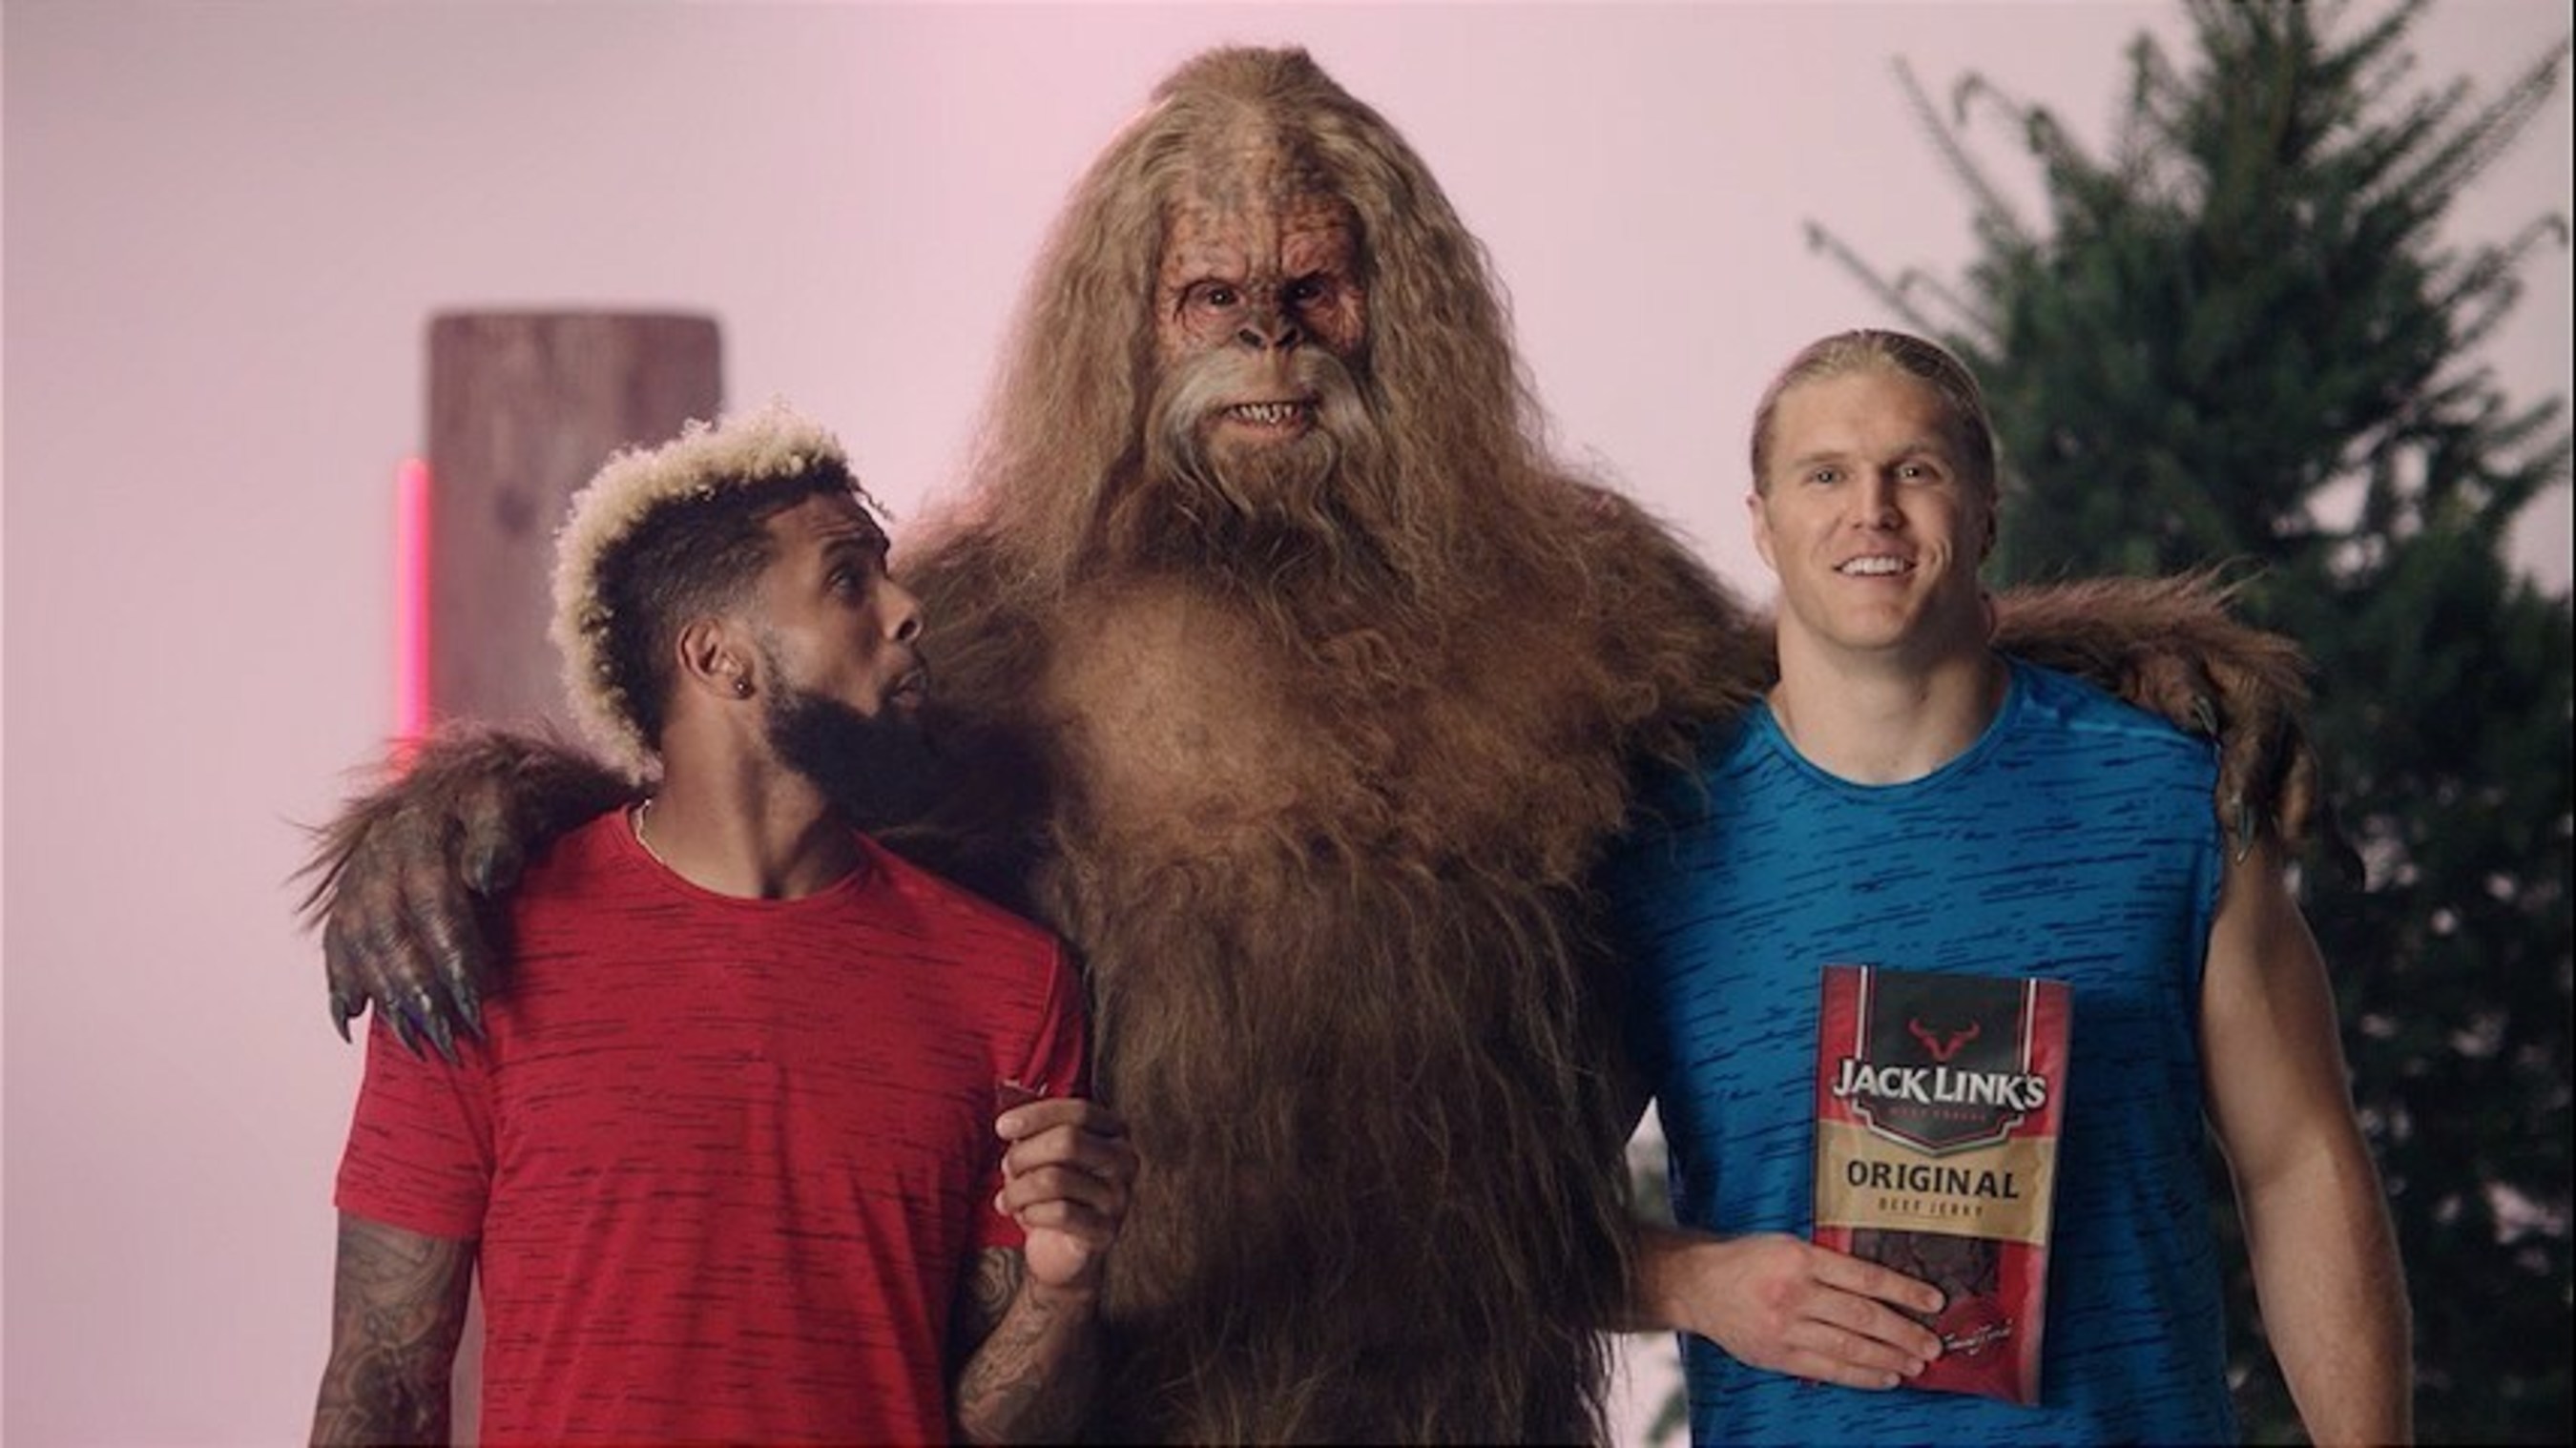 Football superstars build beastly physiques with protein-packed Jack Link's Jerky and Sasquatch.